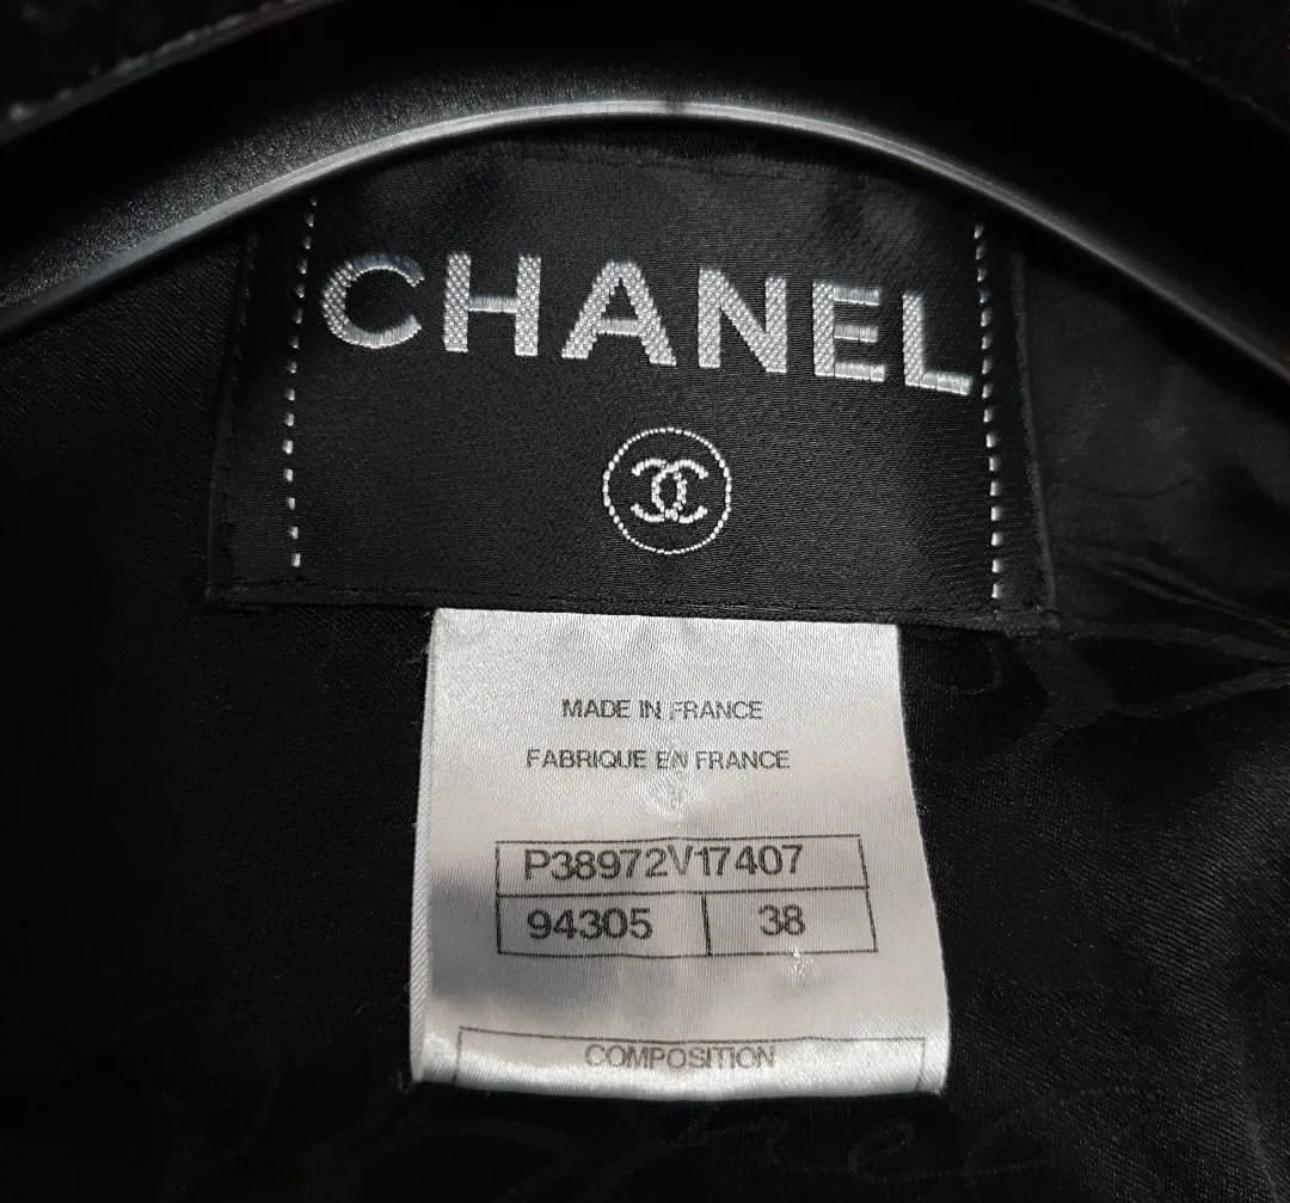 CHANEL Paris Shanghai Velvet Quilted Zip Up Jacket with Corset 
size 38 US size 6 or Size small 

Preowned but in good condition.
Has some abrasion seen on photos.

Details
From the Pre-Fall 2010 Metiers d'Art Collection. 
Black Chanel velvet jacket